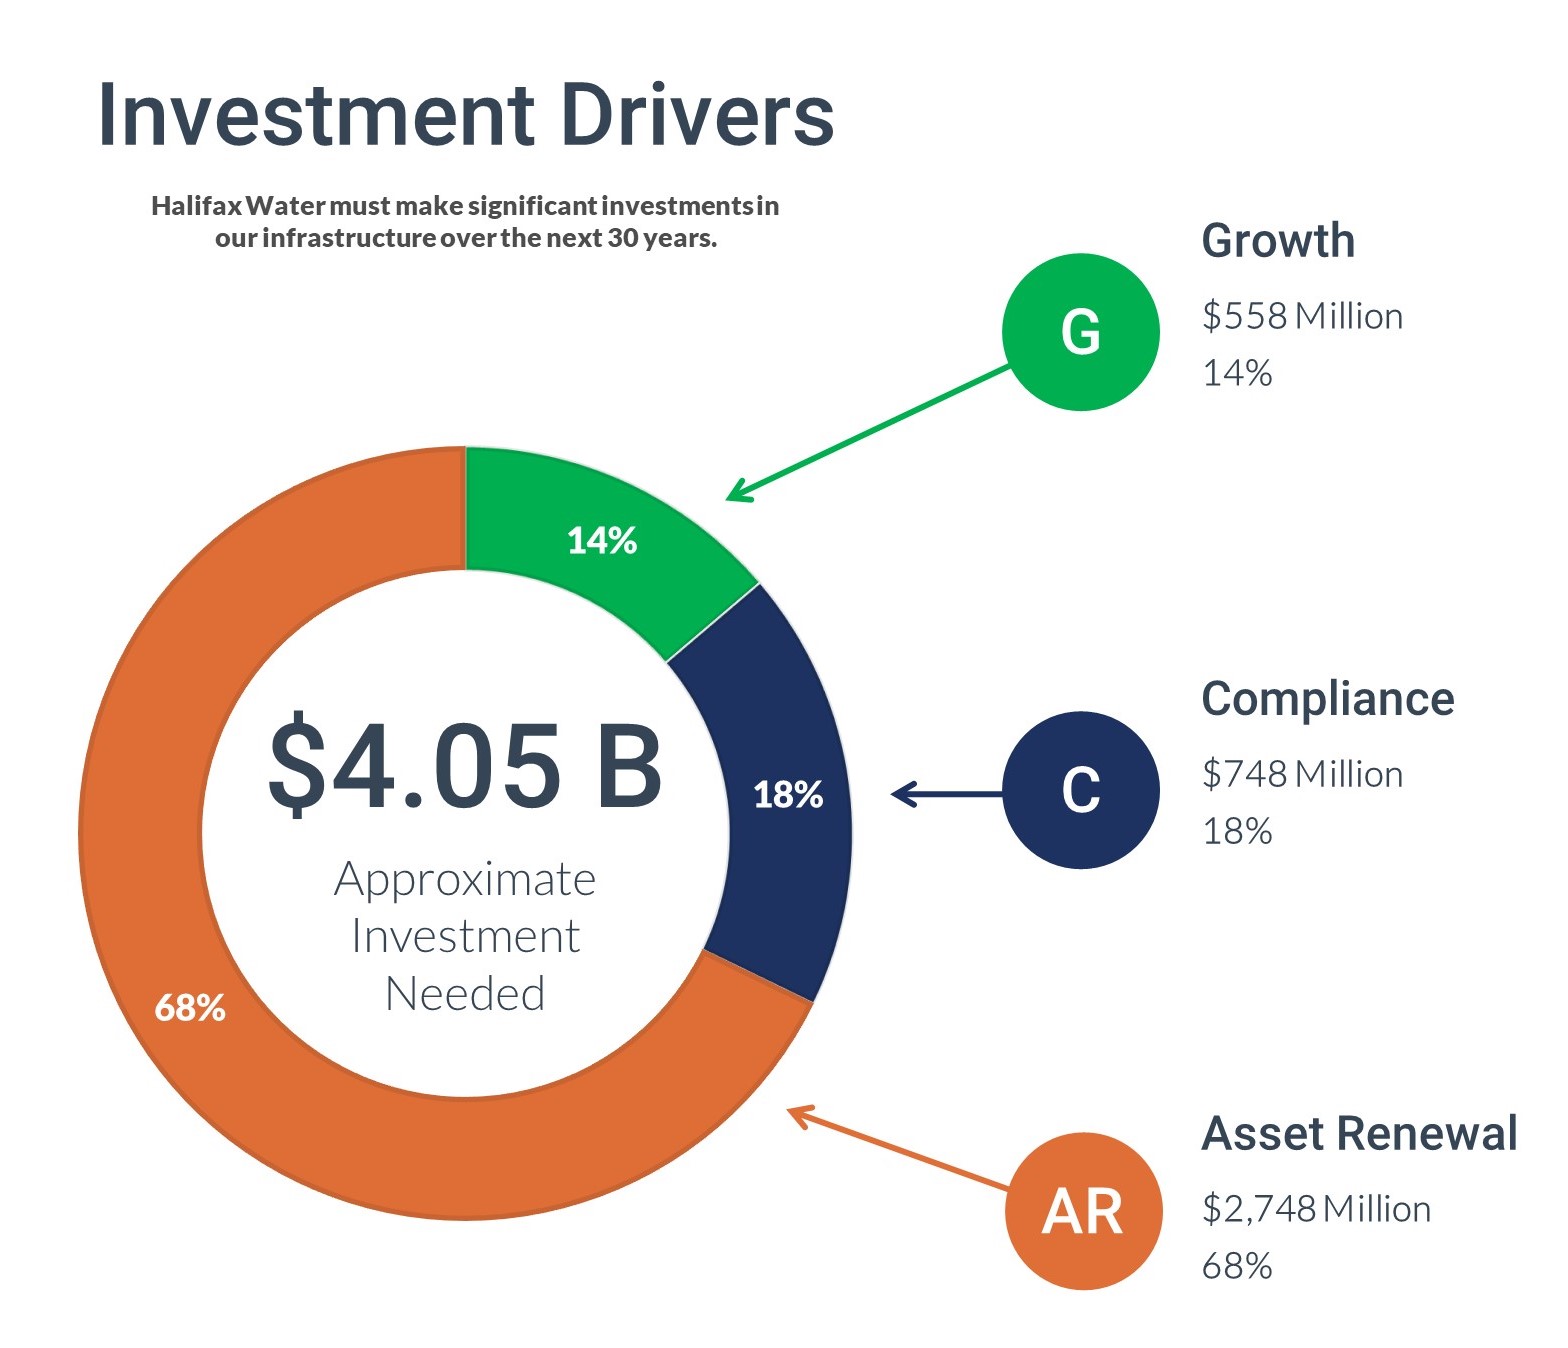 Investment Drivers Pie Chart